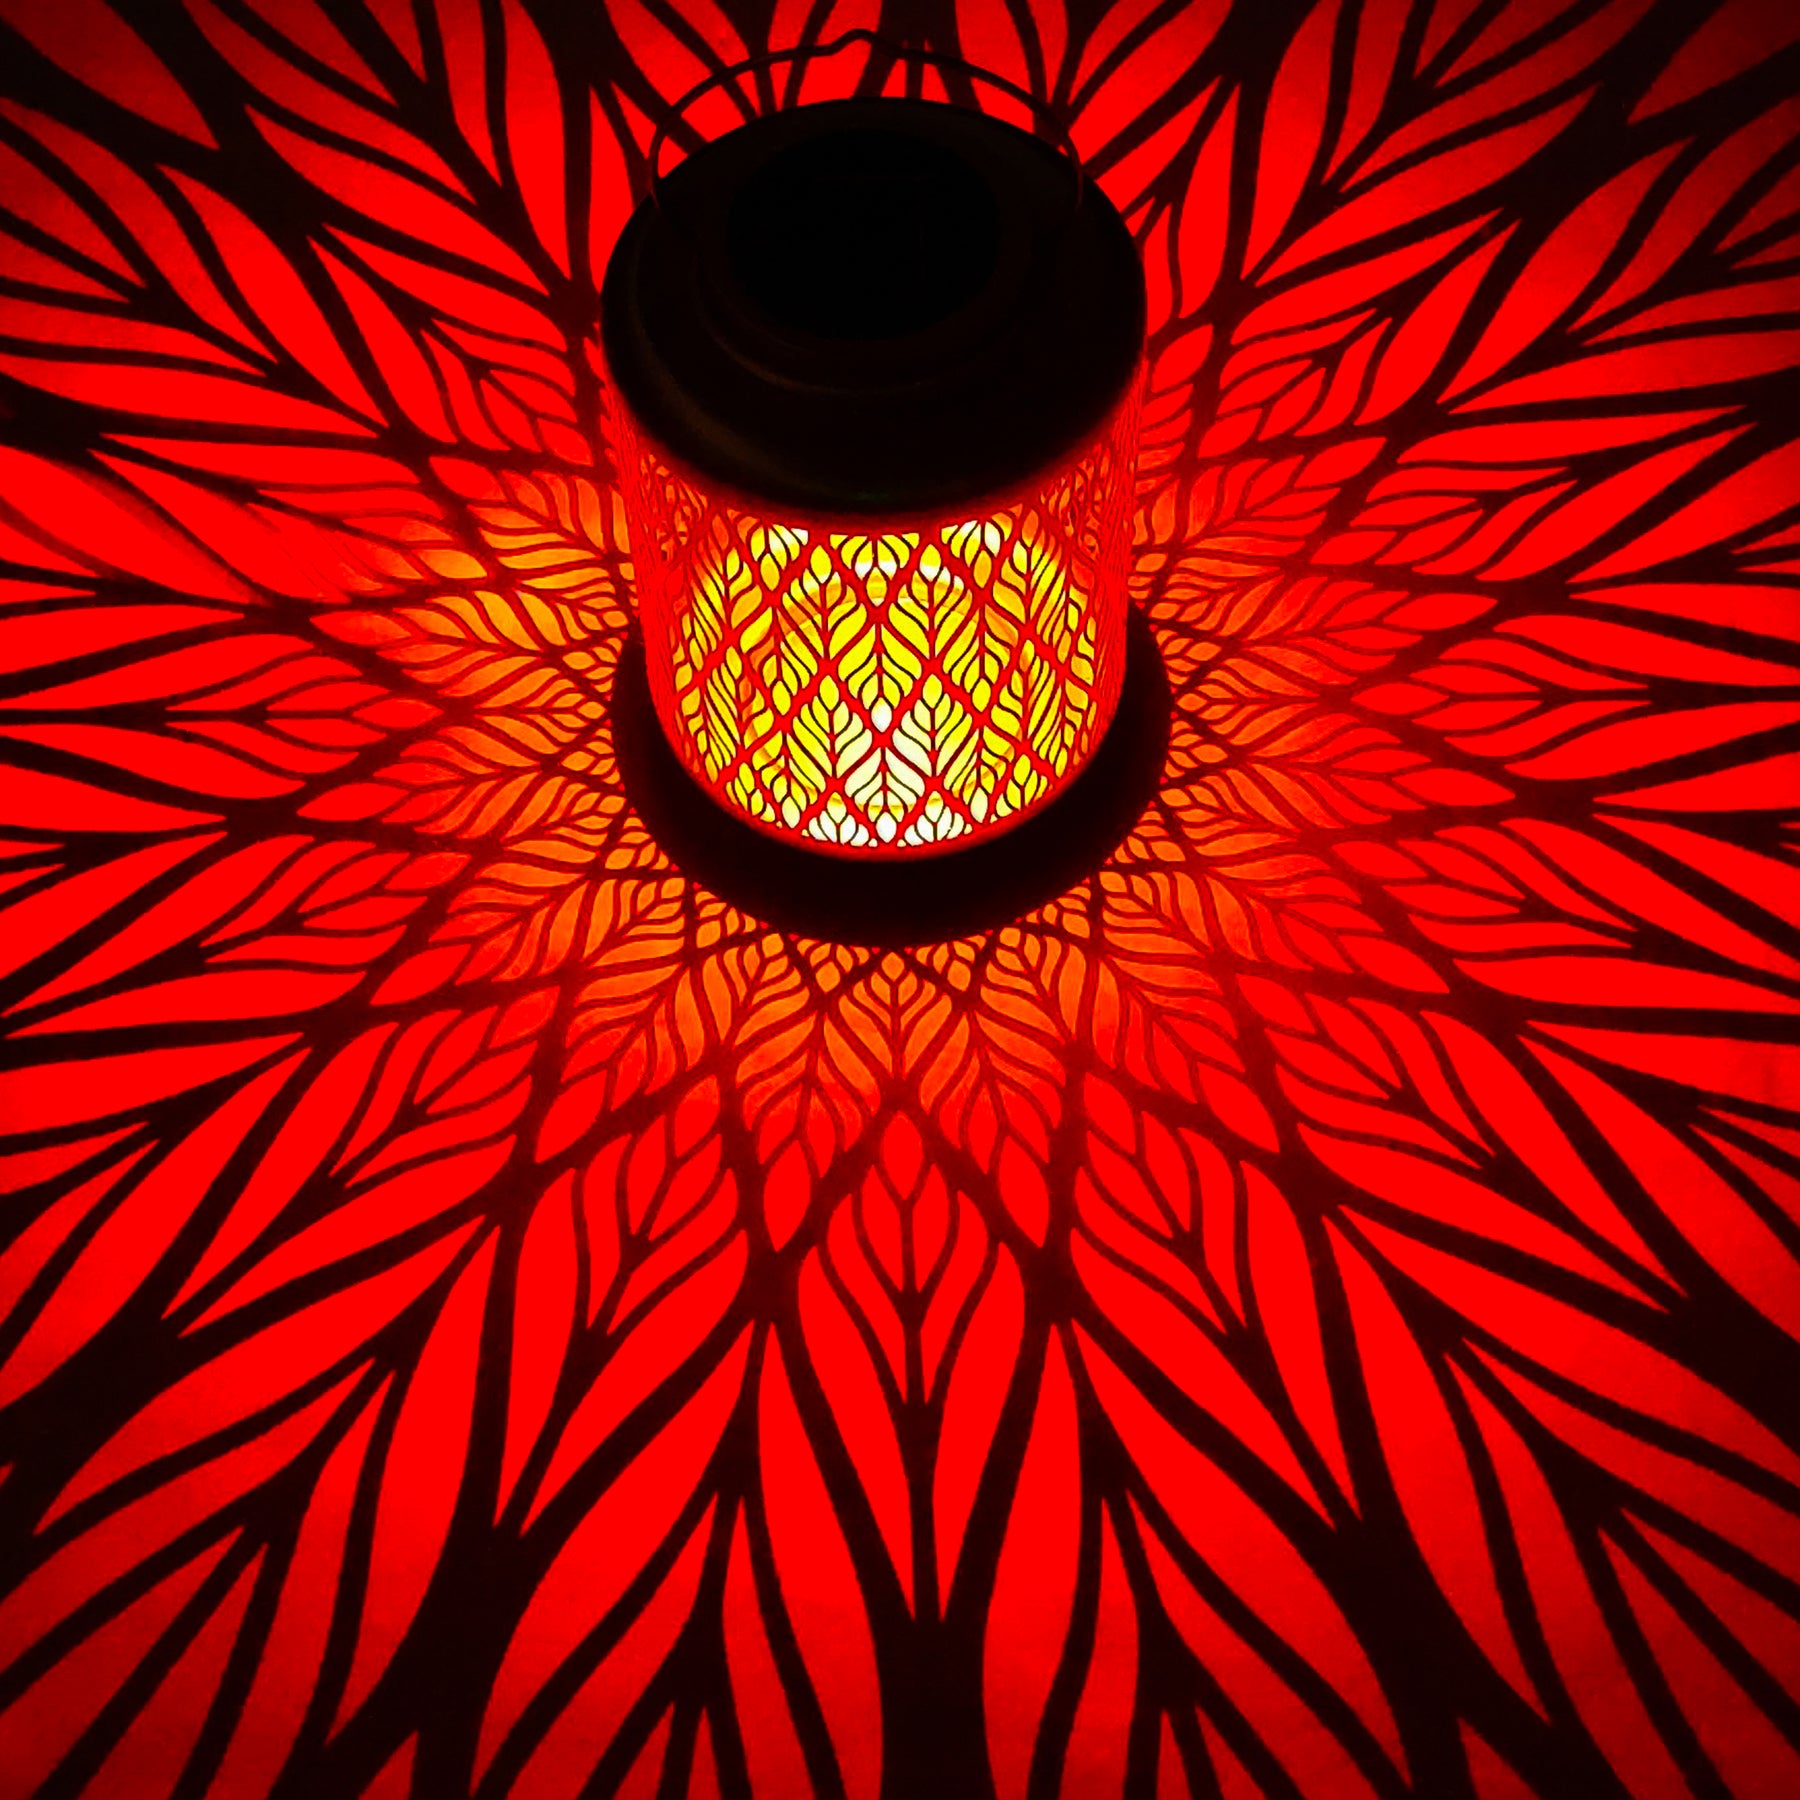 Bliss Outdoors 12-inch Tall Hanging and Tabletop Decorative Solar LED Lantern with Unique Diamond Leaf Design turned on and creating a cool pattern of red light on the surface around it.